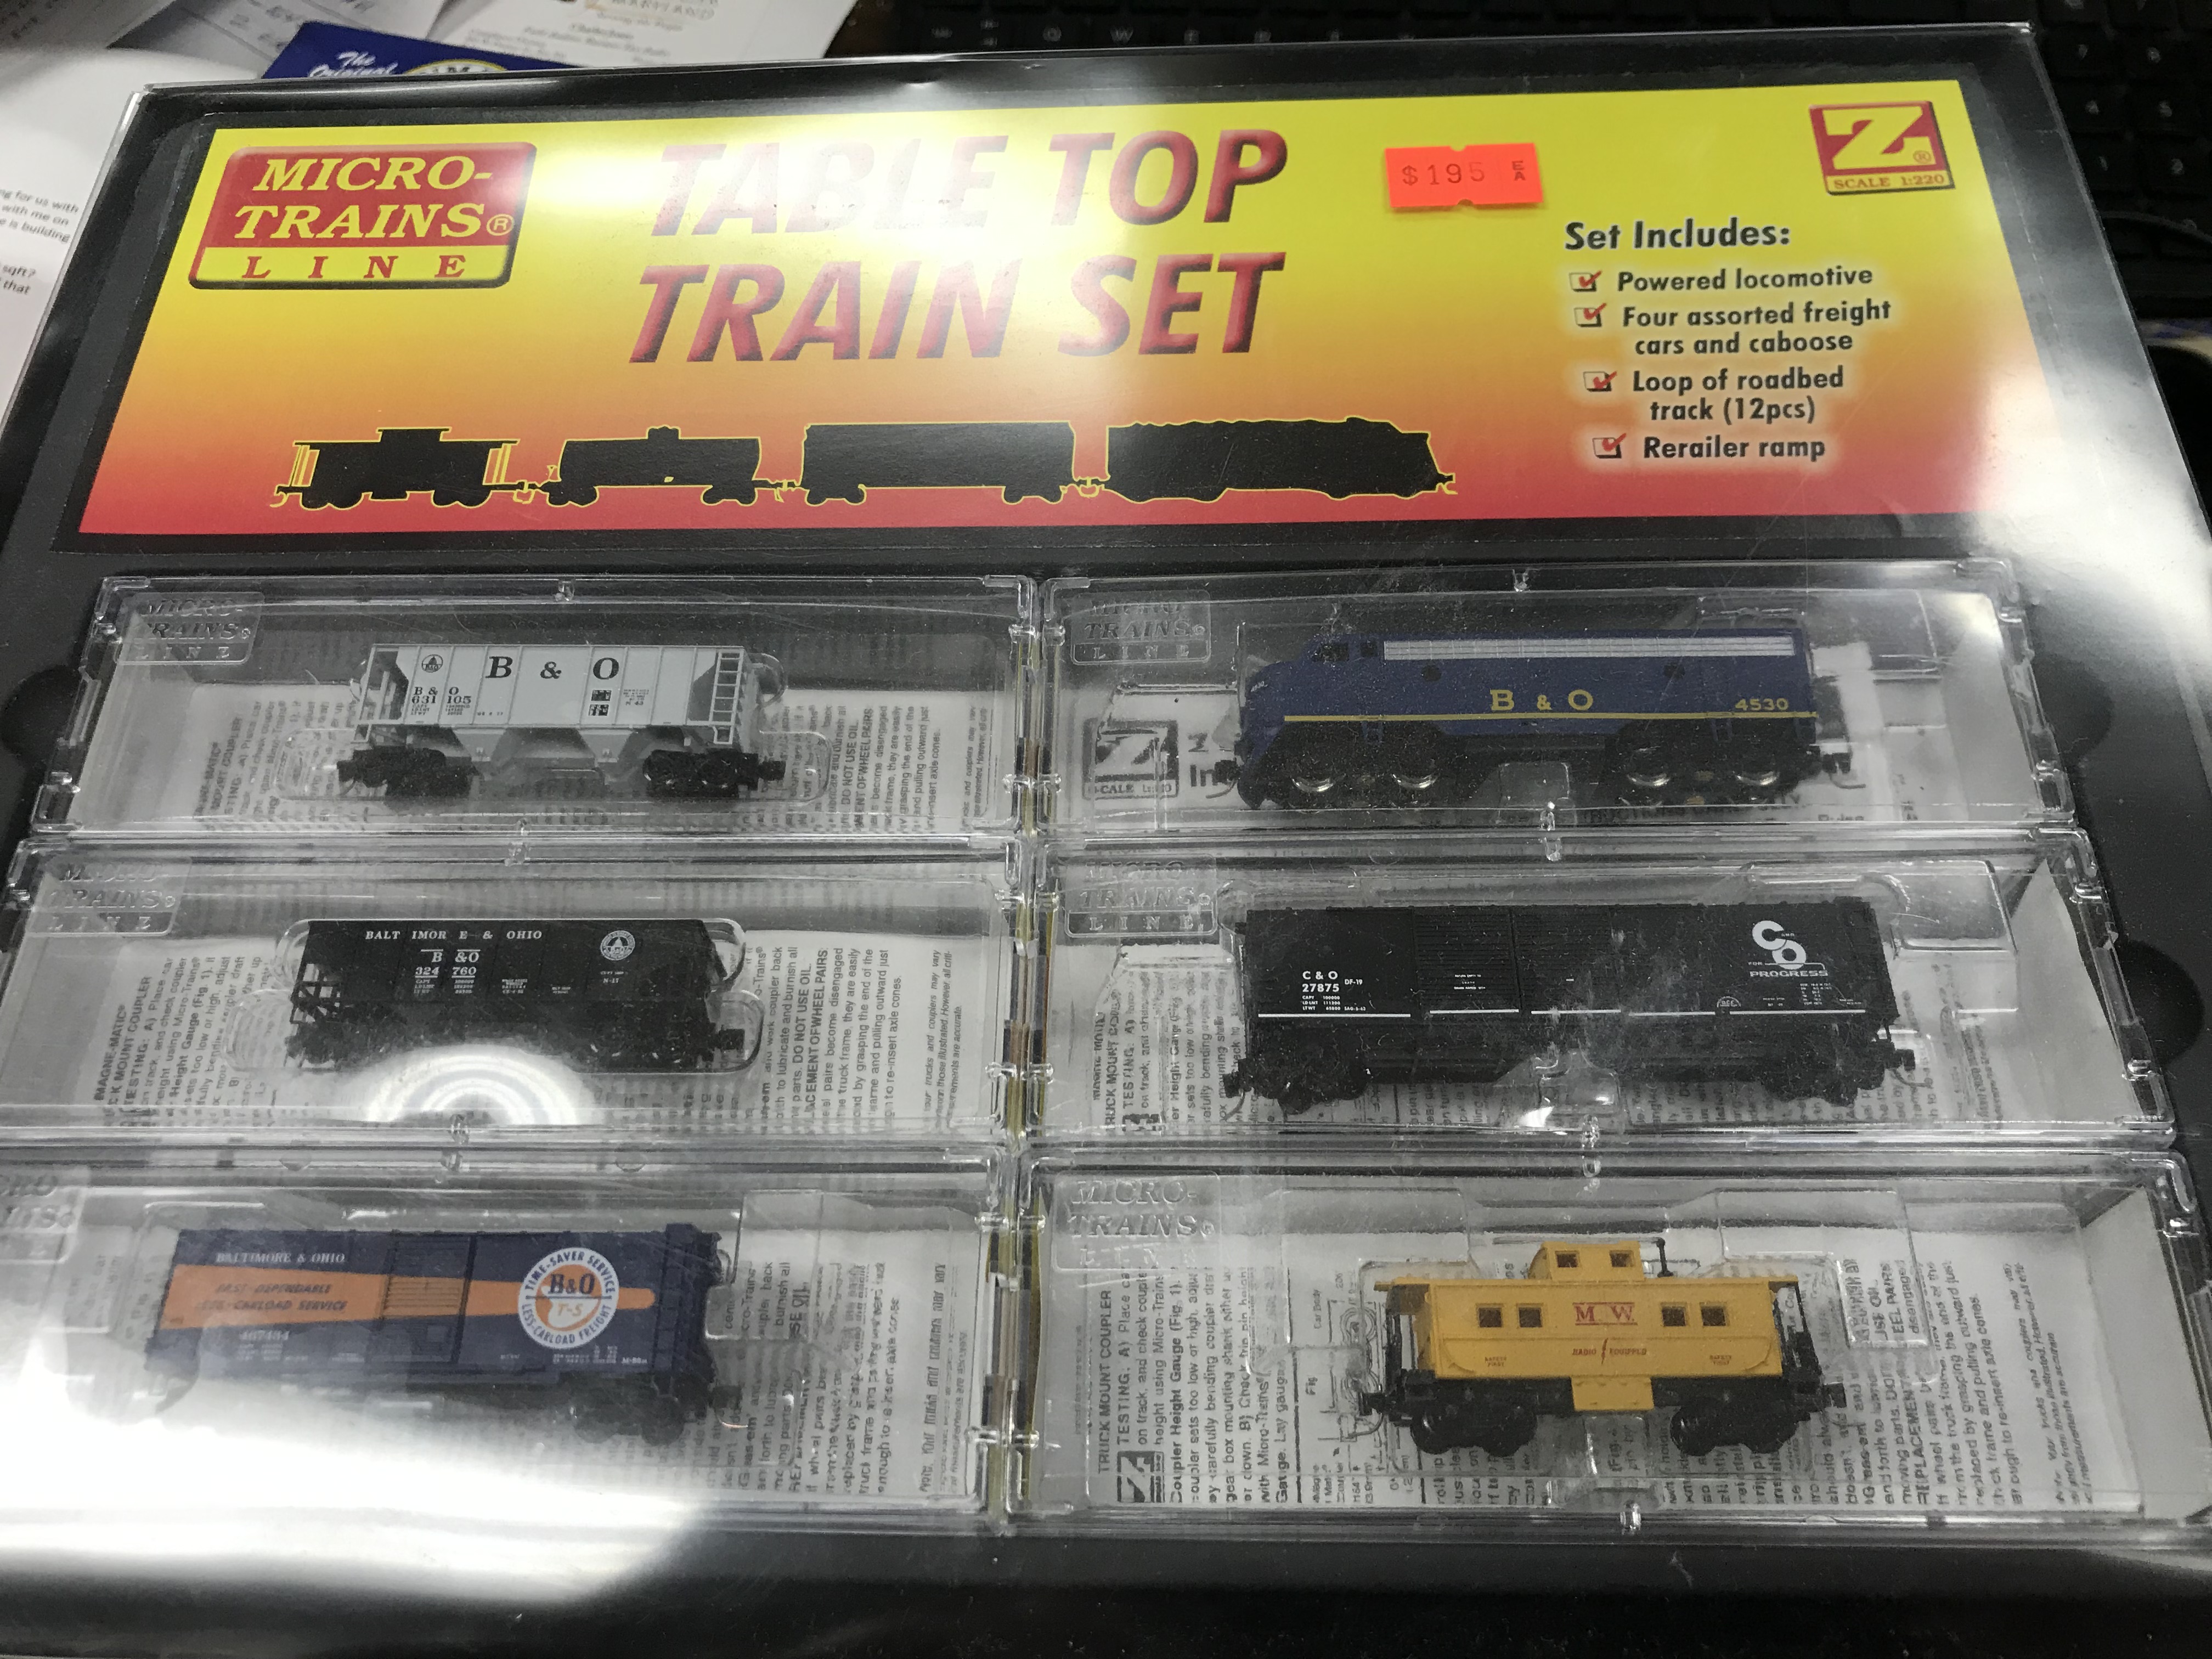 MICRO-TRAINS LINE Z SCALE TABLE TOP SET